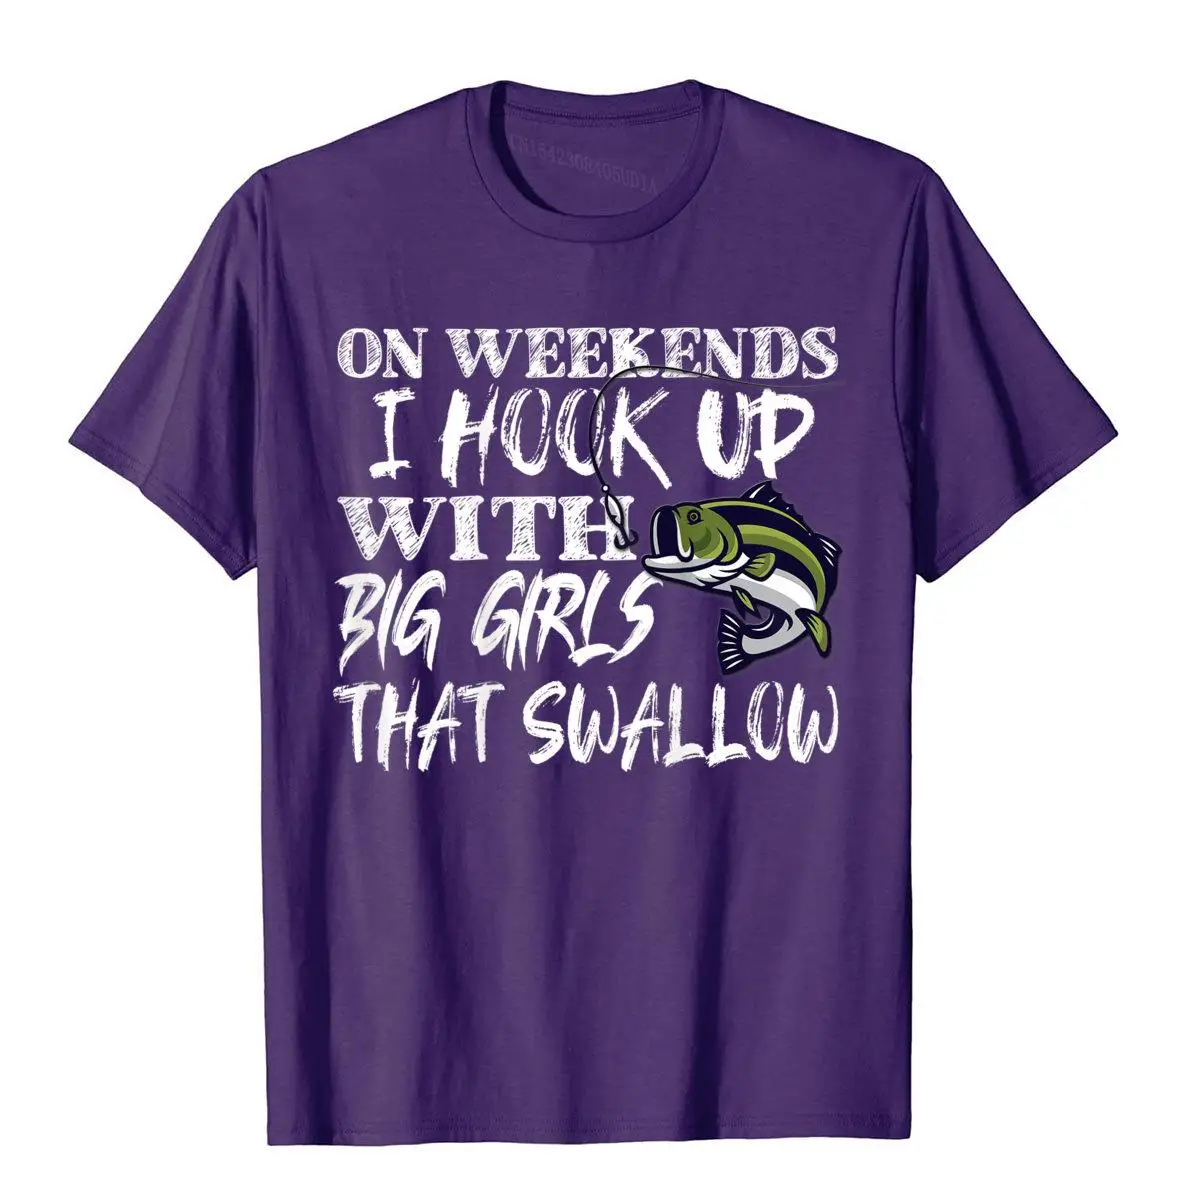 Funny Quote Bass Fishing Shirt Printed On Back T-Shirt__A11584purple